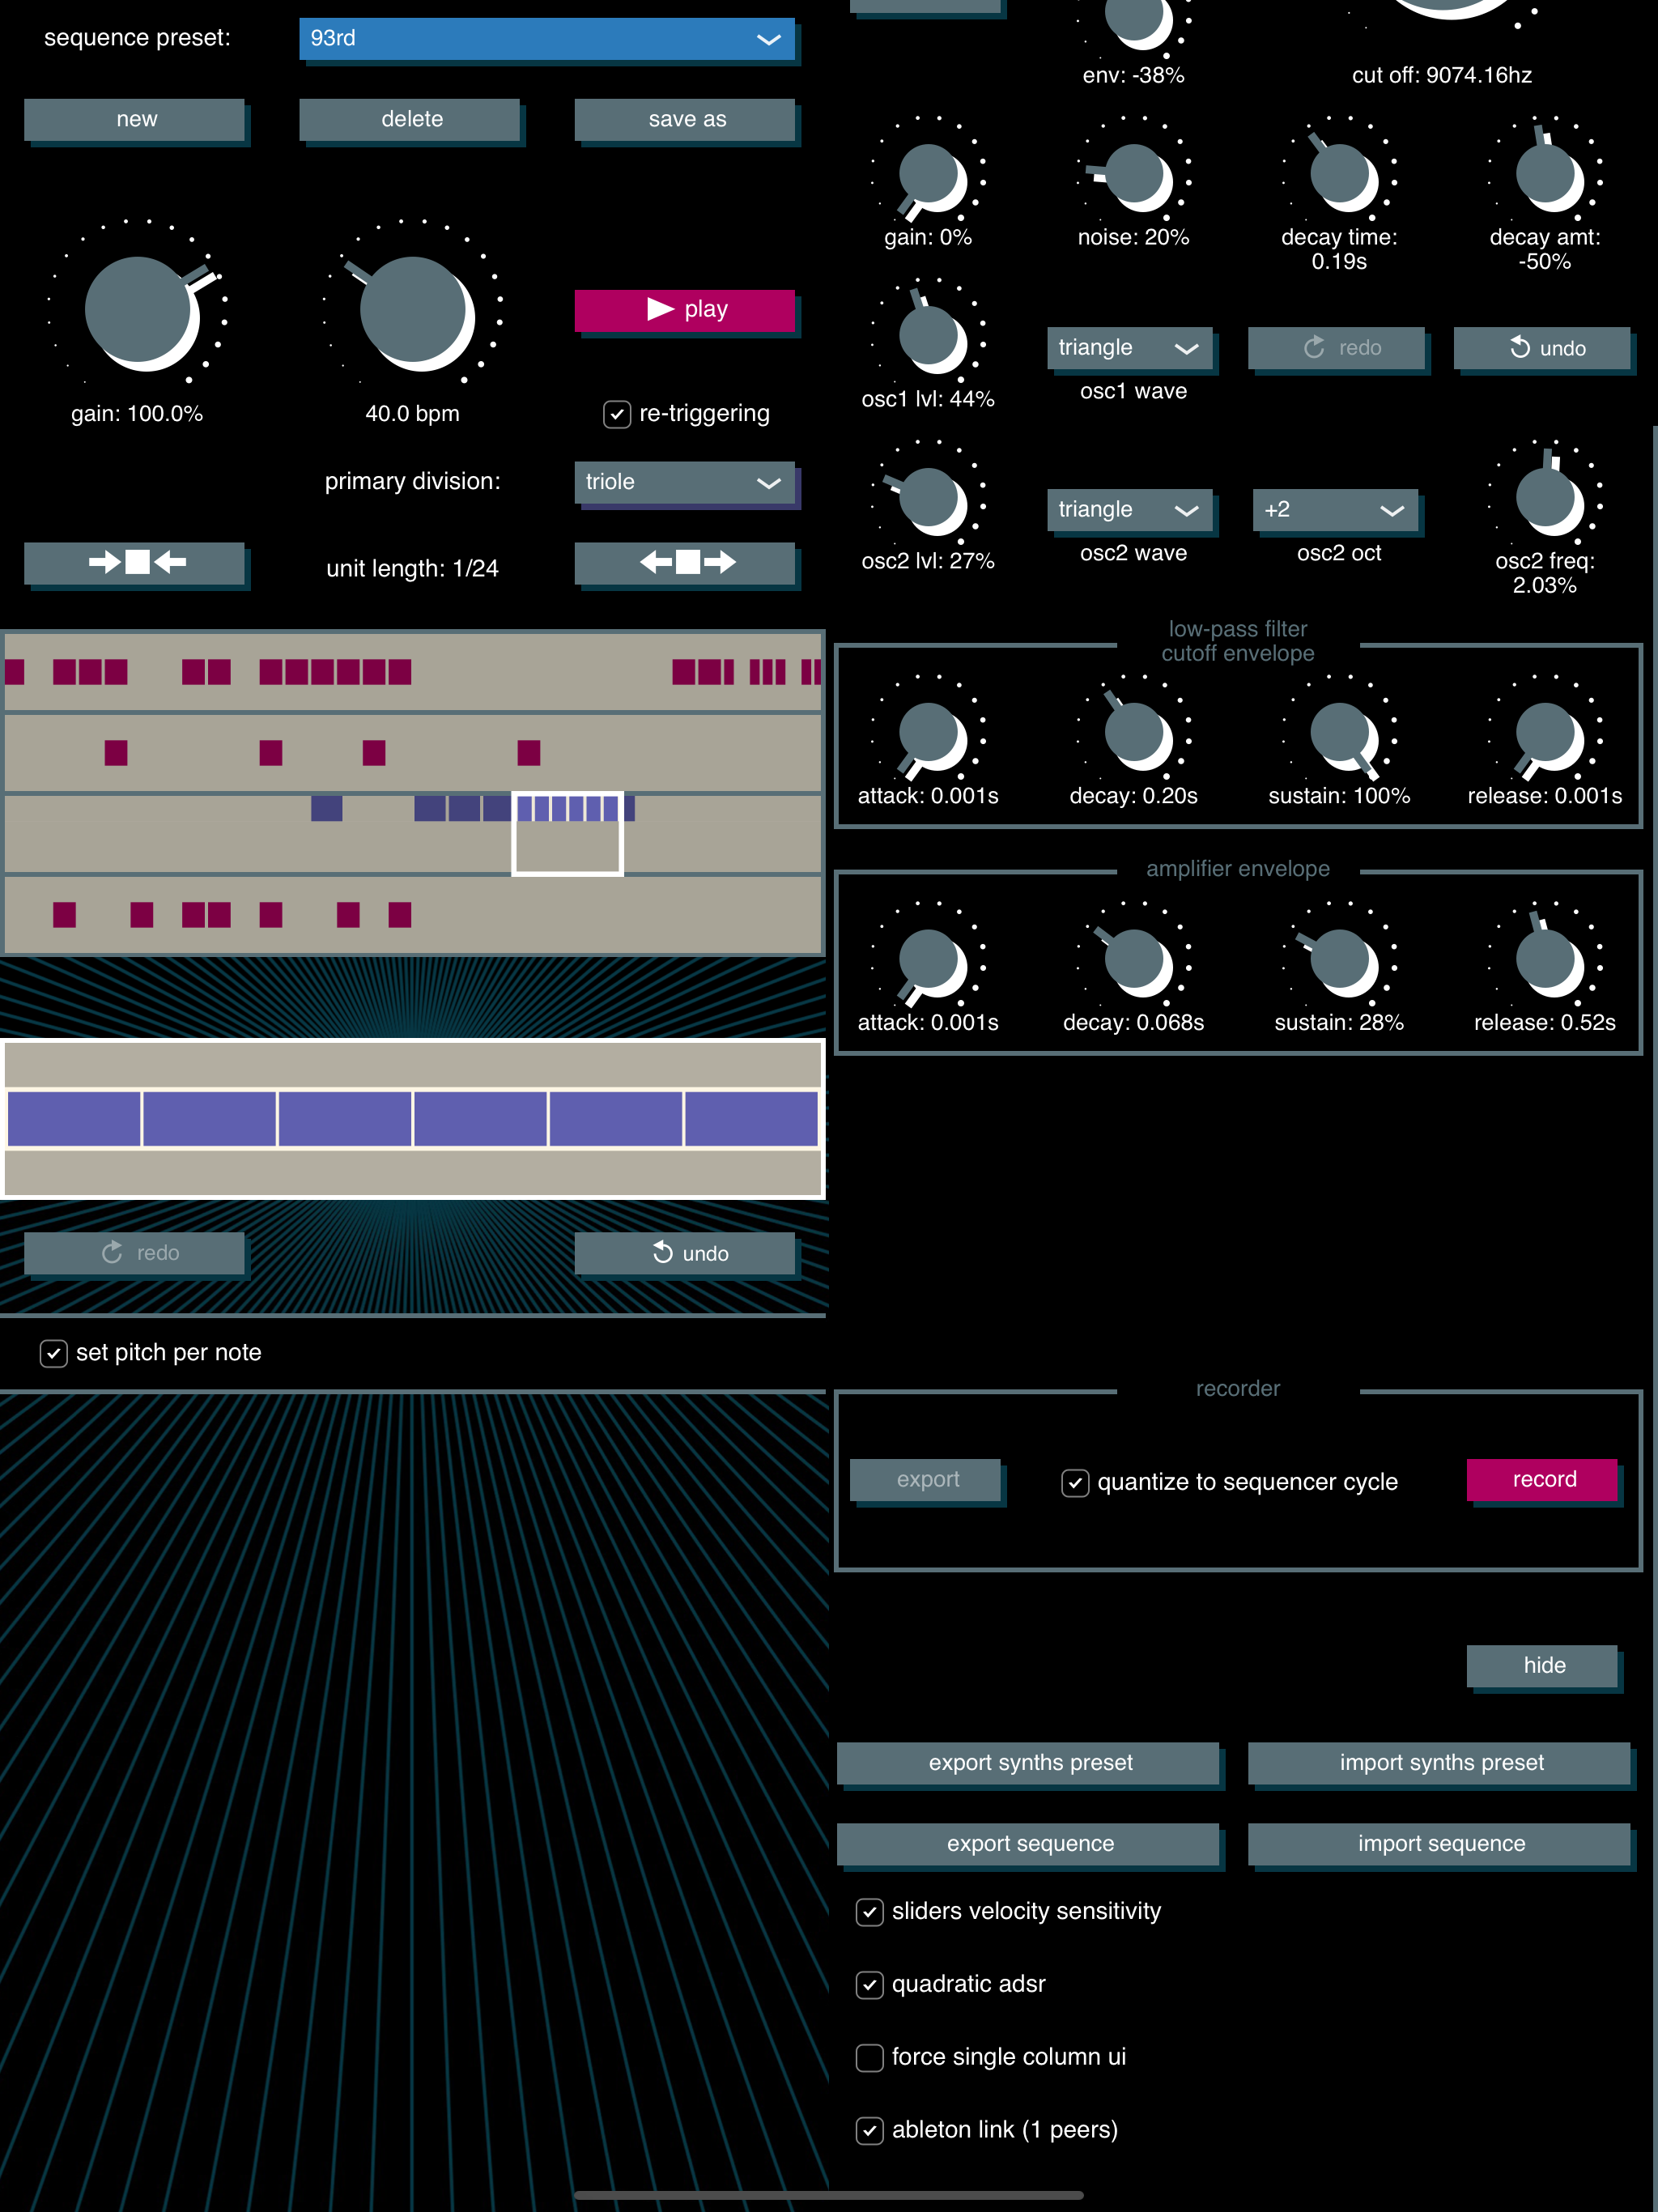 Percussive Synth release v1.2: Changelog